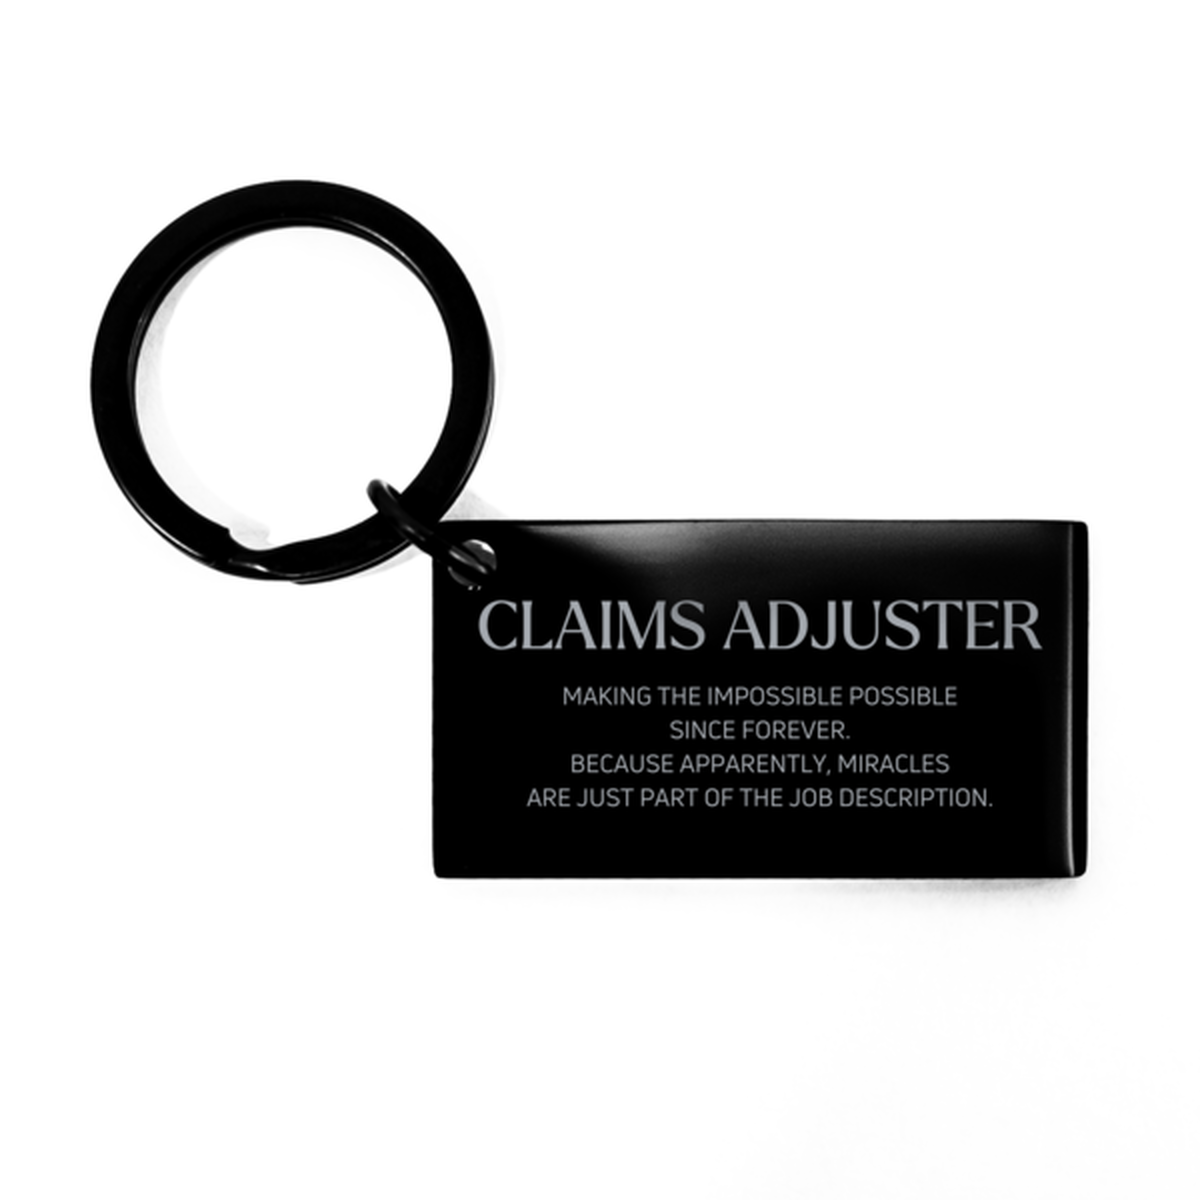 Funny Claims Adjuster Gifts, Miracles are just part of the job description, Inspirational Birthday Keychain For Claims Adjuster, Men, Women, Coworkers, Friends, Boss